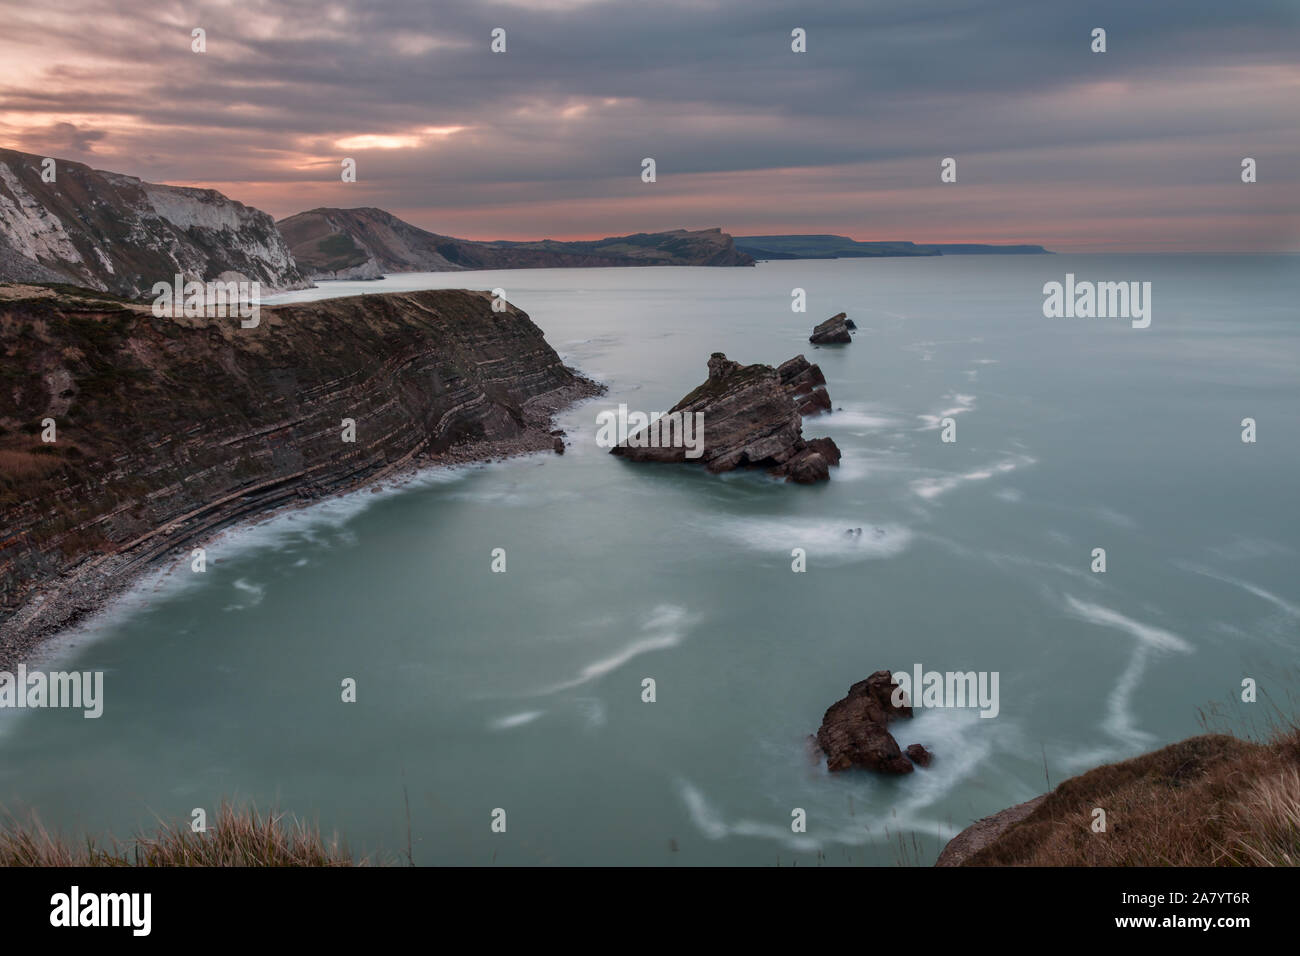 Mupe Bay Dorset England Long exposure at dawn on Dorset's Jurassic coast at Mupe Bay, seen from Bacon Hole. Stock Photo